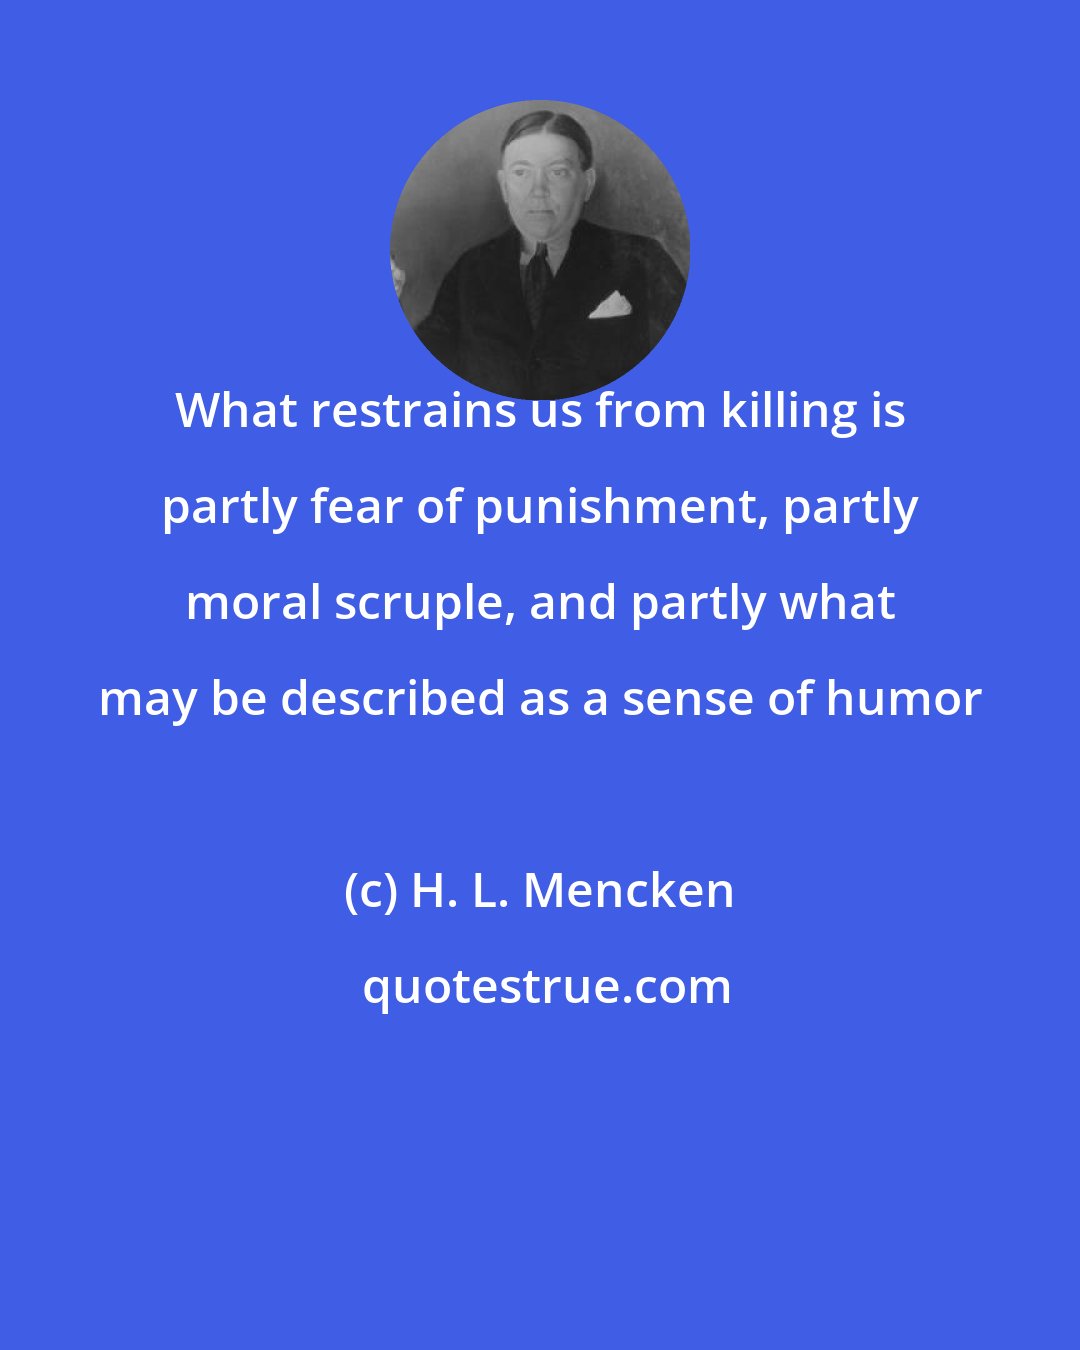 H. L. Mencken: What restrains us from killing is partly fear of punishment, partly moral scruple, and partly what may be described as a sense of humor